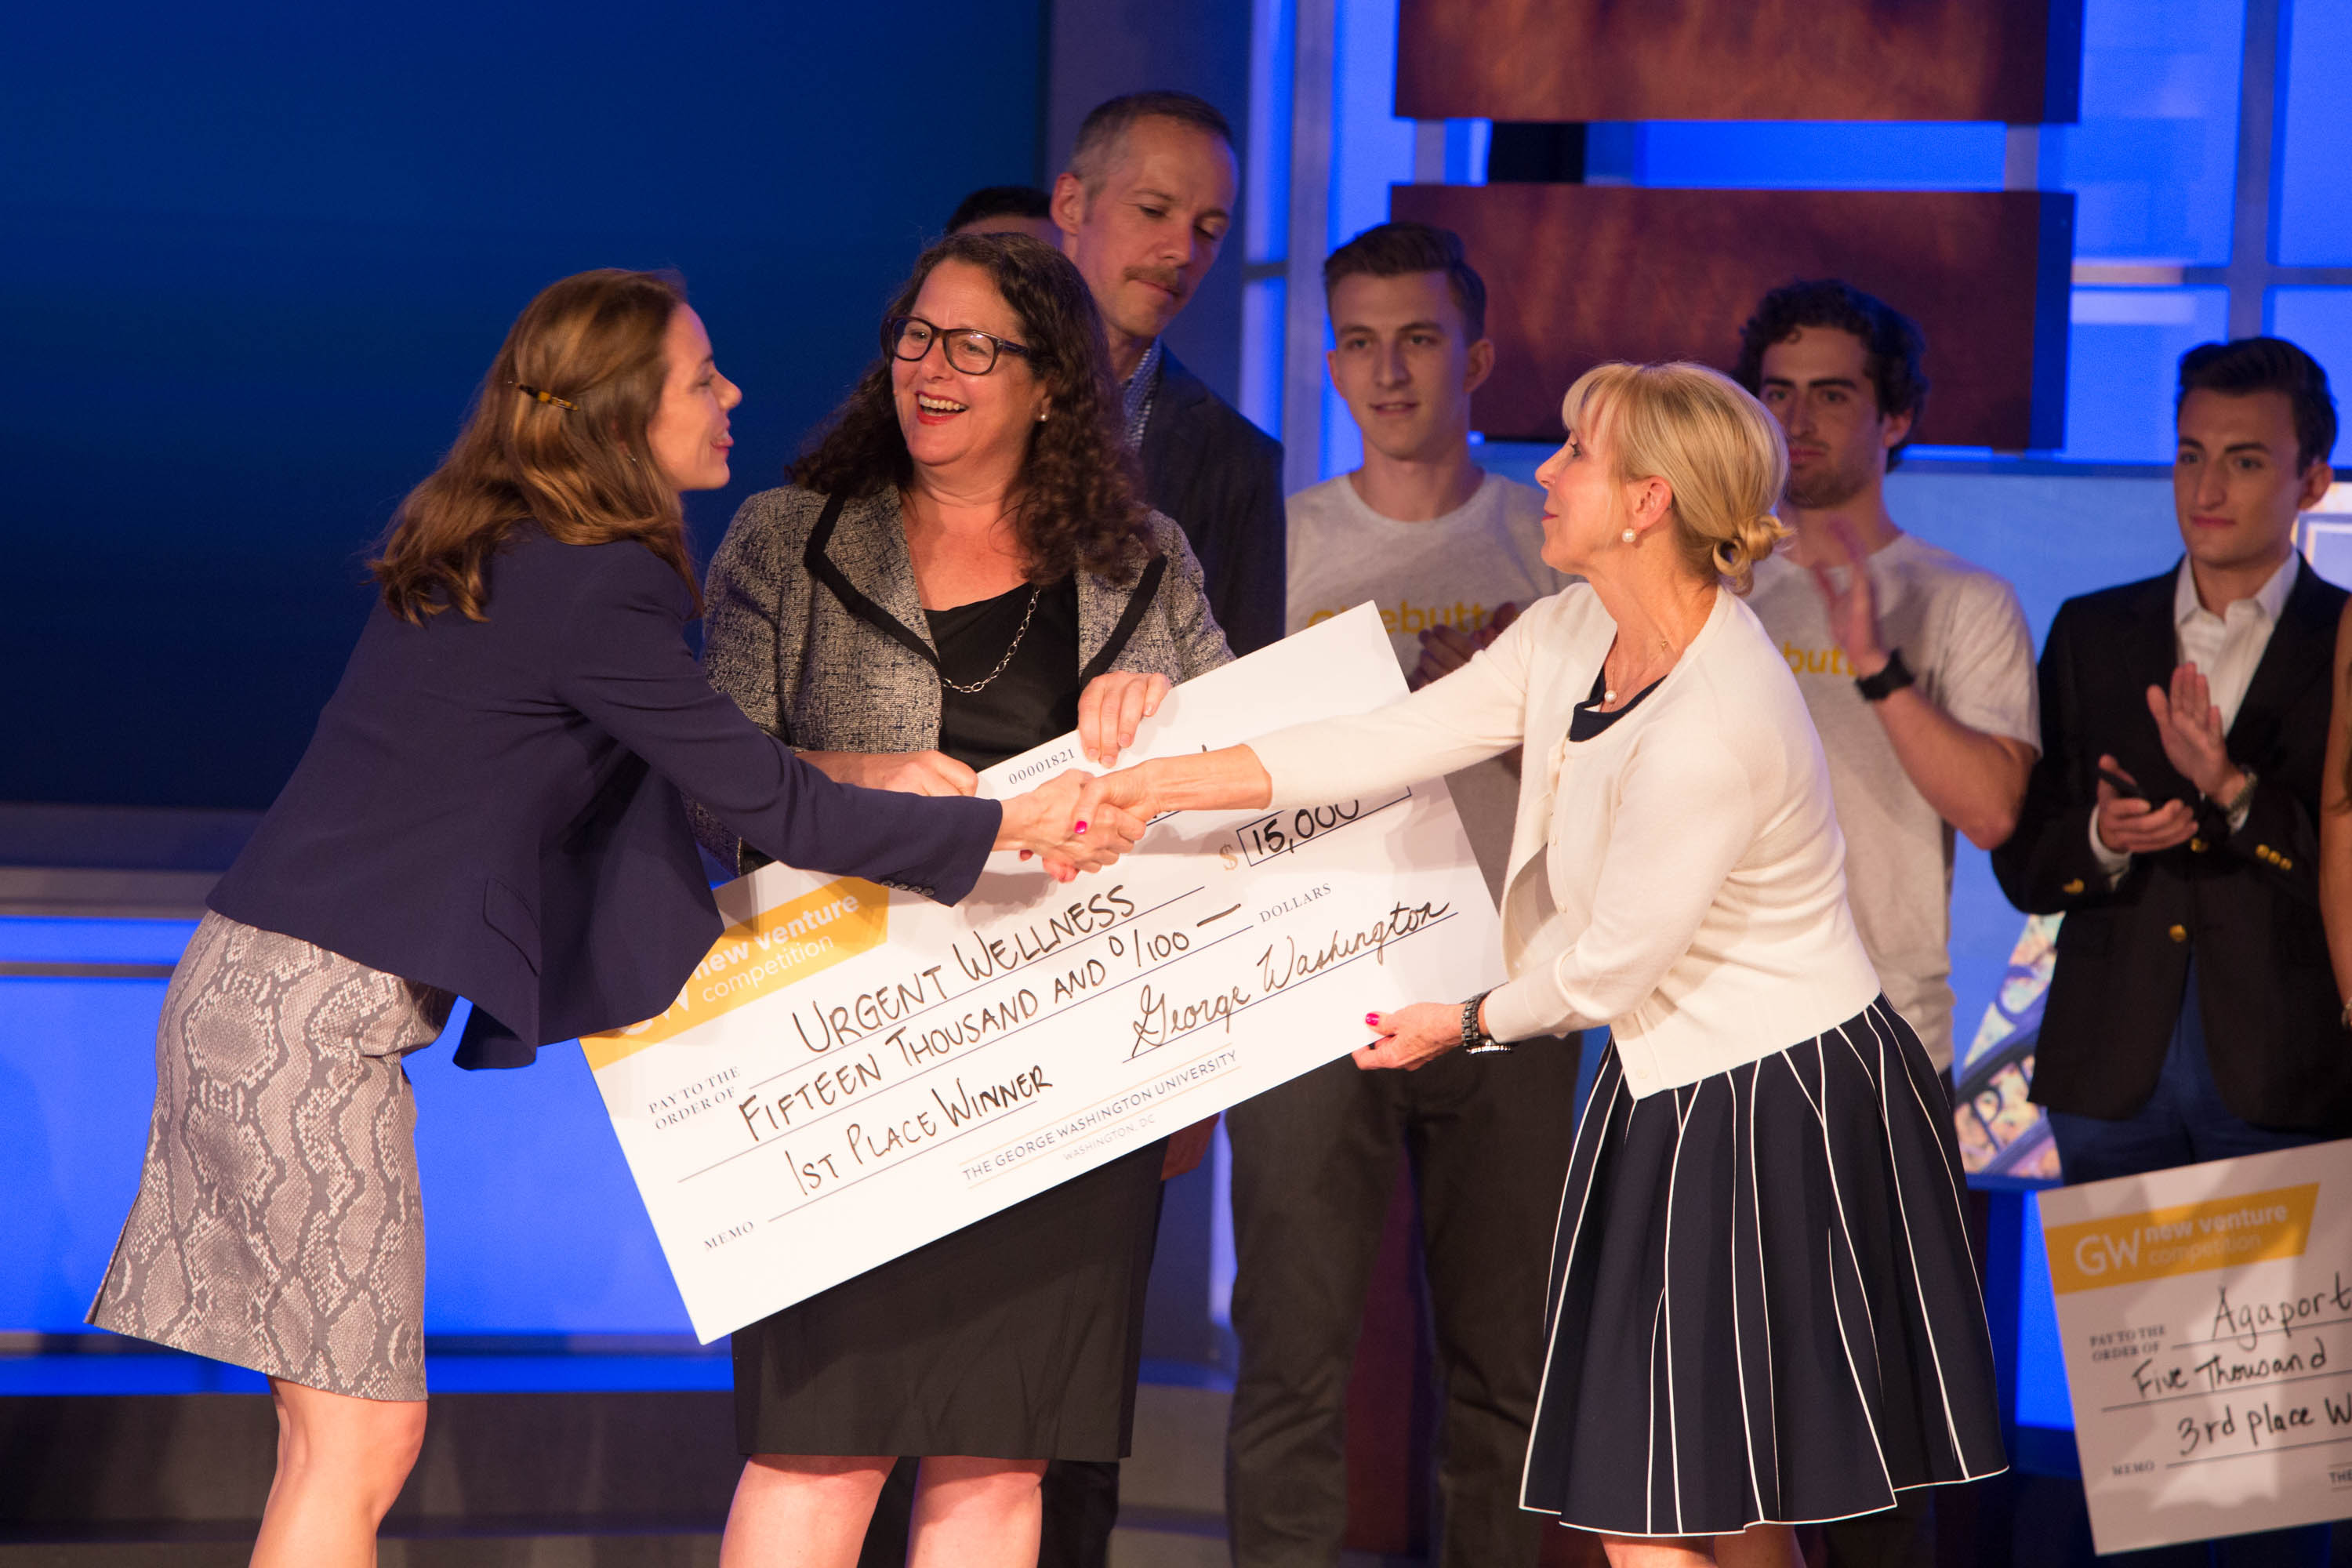 New Venture Competition winner accepts oversized check on stage